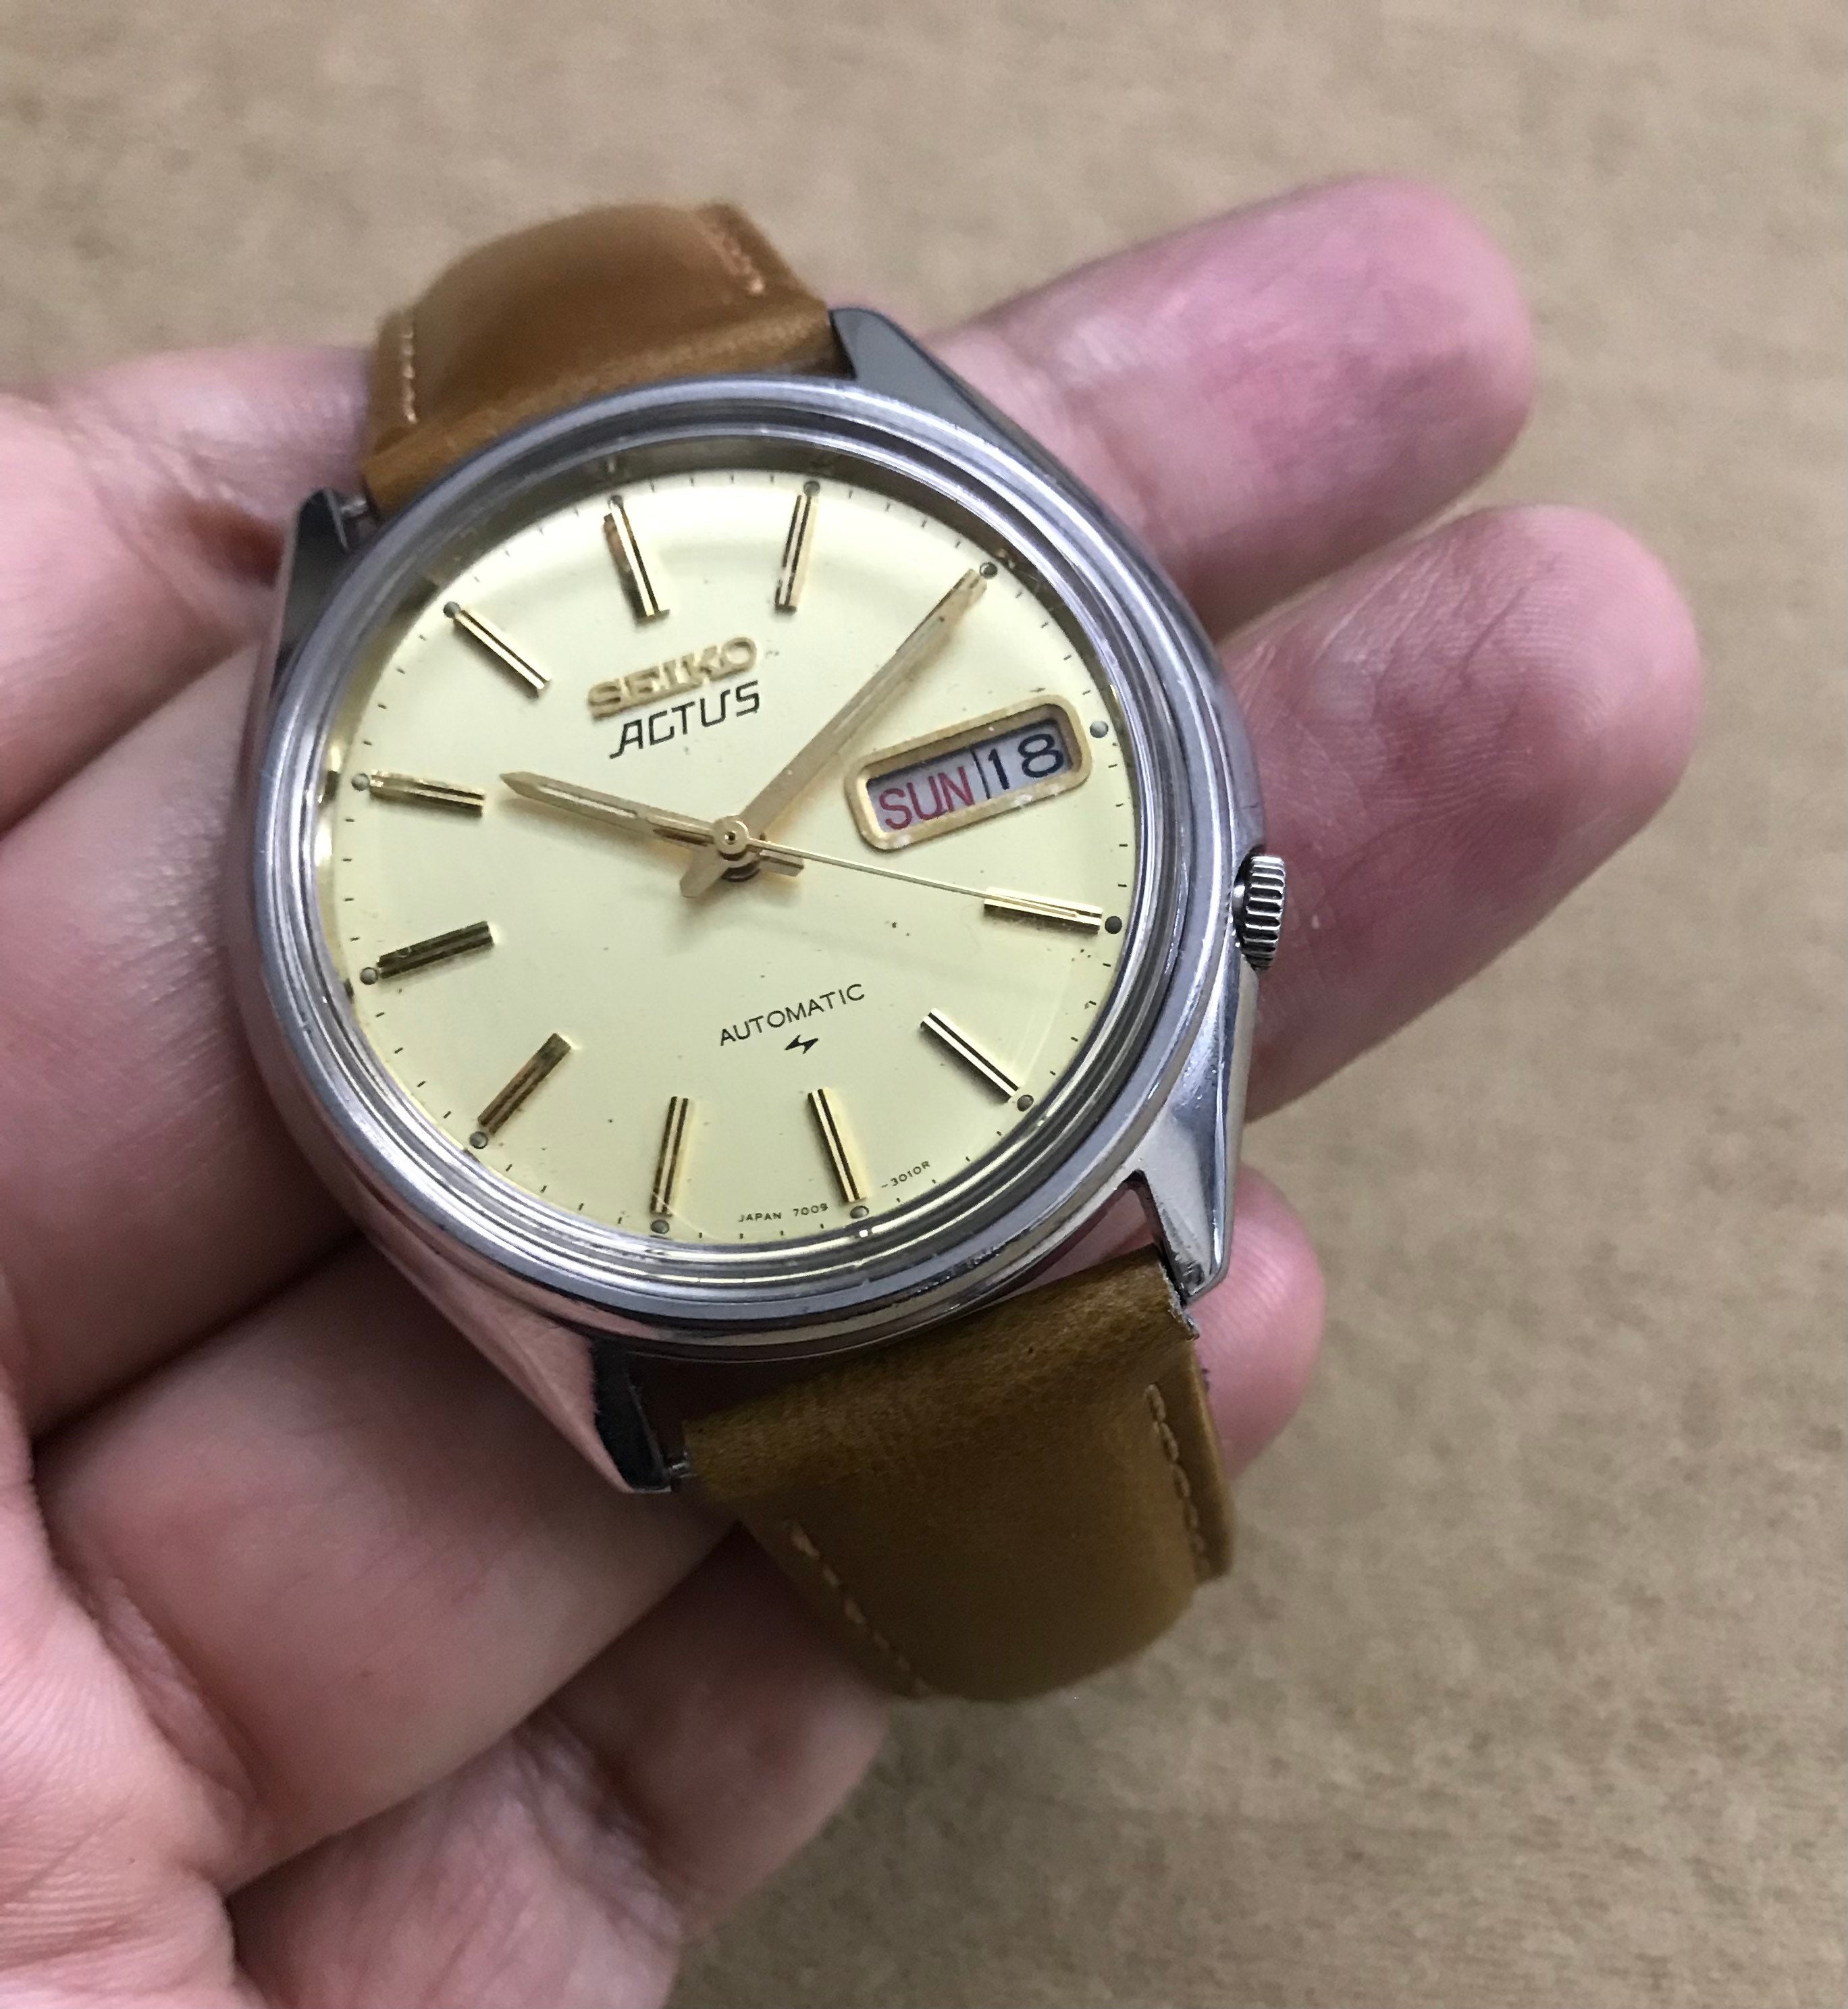 Seiko Actus Automatic Watch Men's Vintage Day Date - Etsy